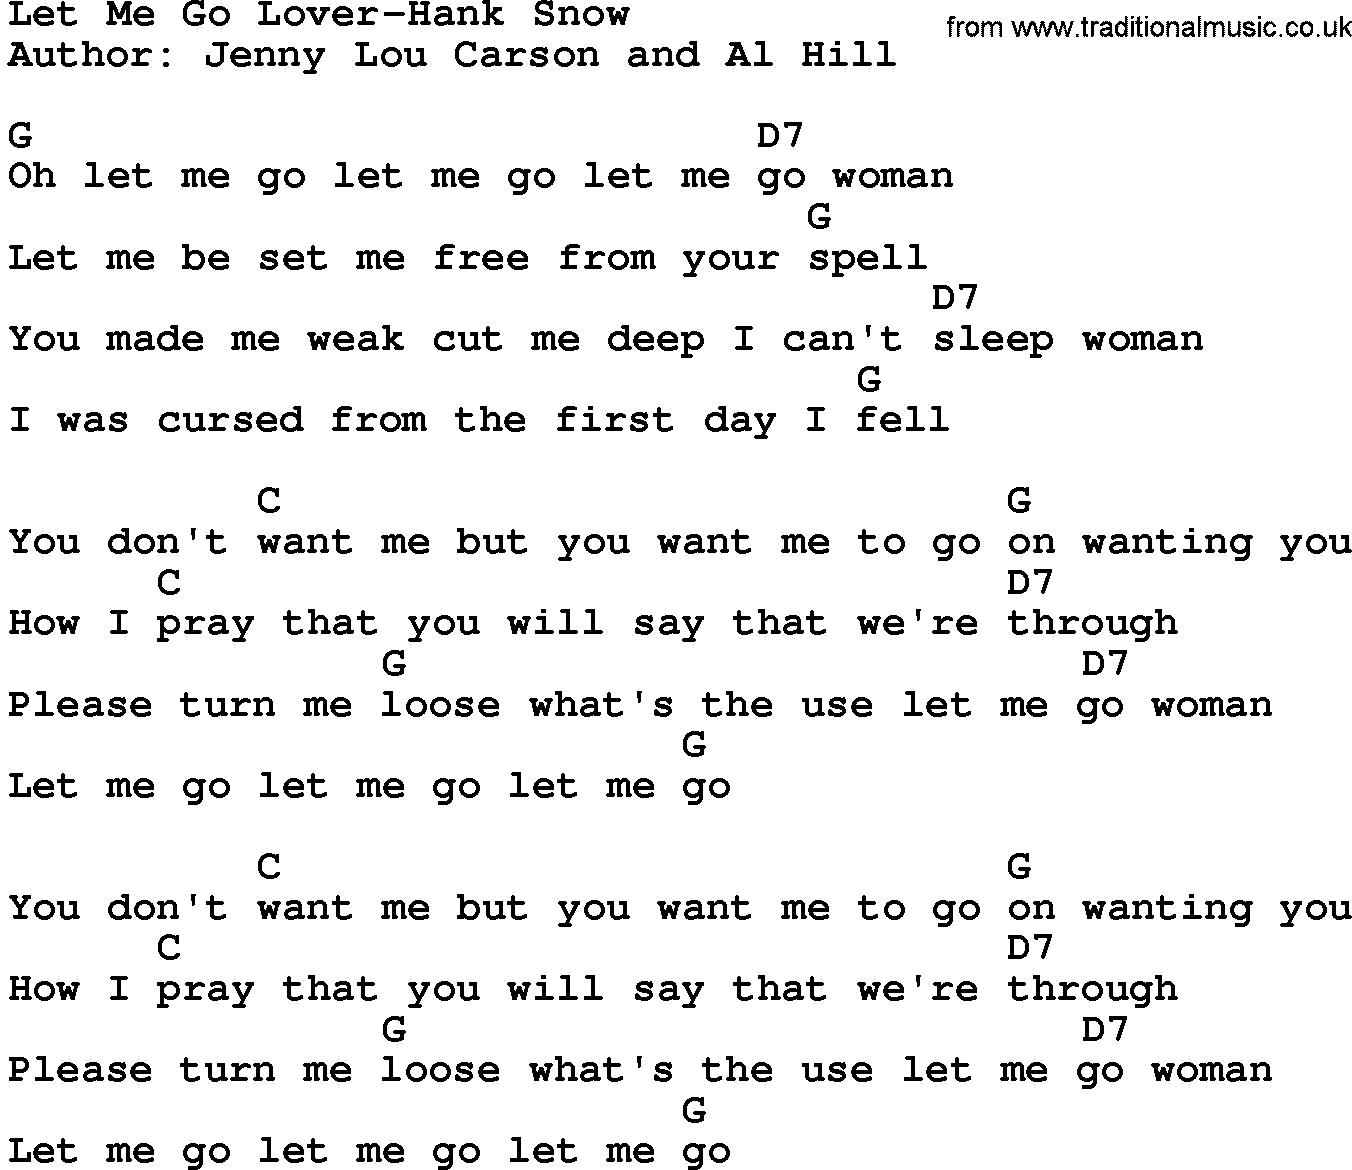 Country music song: Let Me Go Lover-Hank Snow lyrics and chords